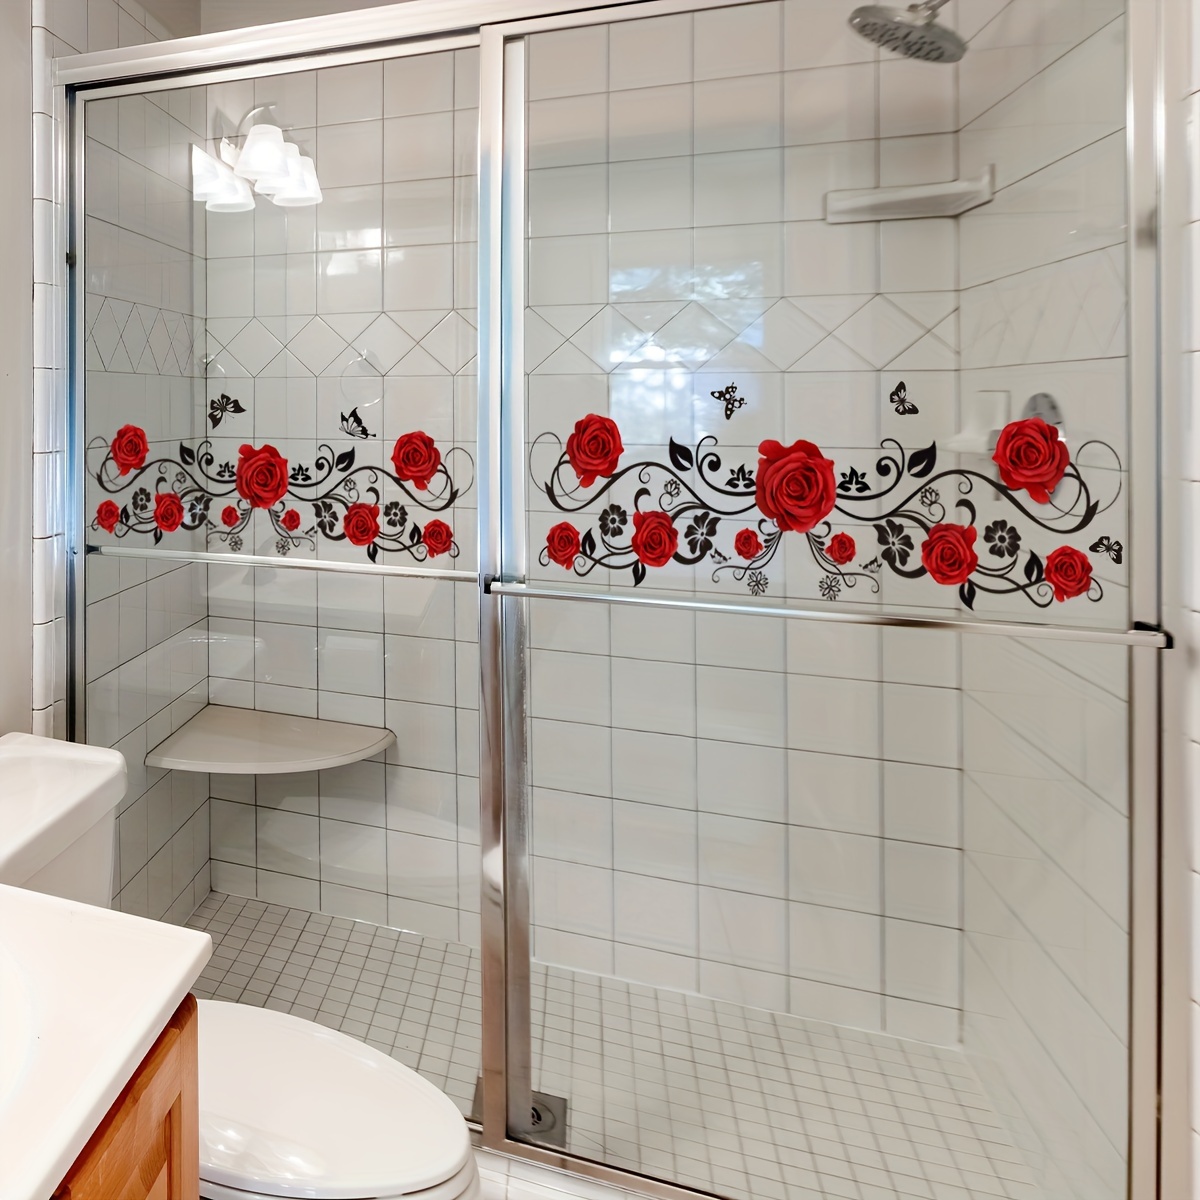 

2pcs Red Rose Flower Vine Butterfly Bathroom Wall Stickers, Toilet Bathroom Bathtub Washstand Home Decoration Wall Stickers